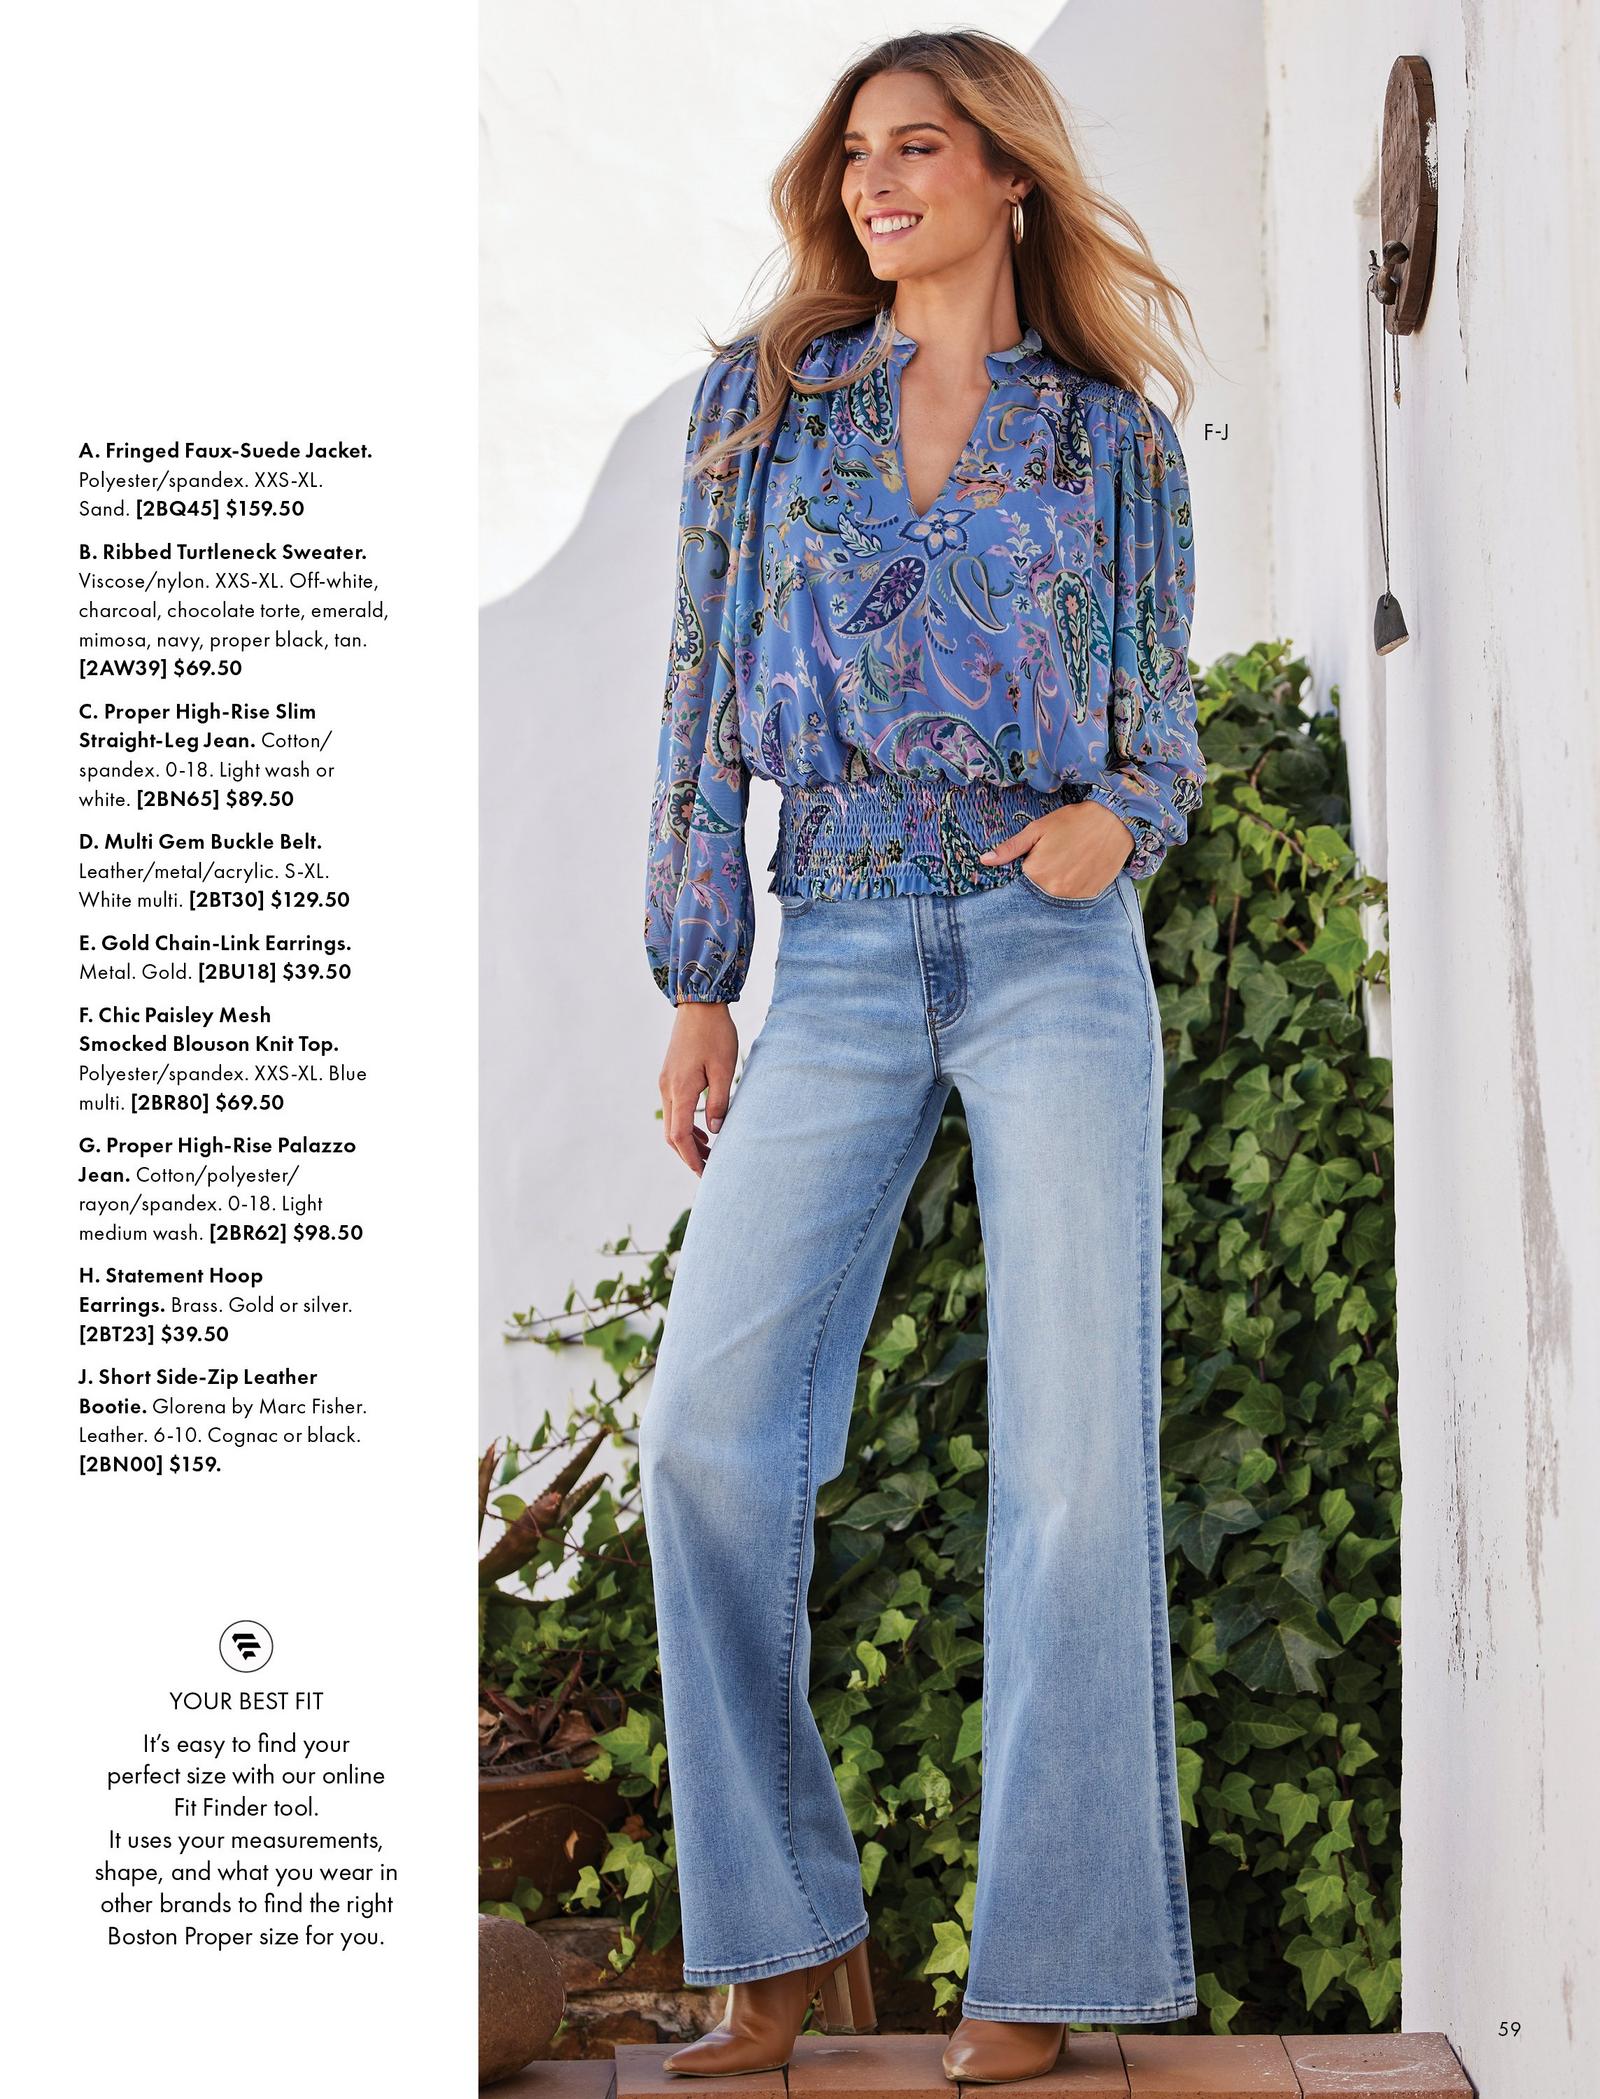 model wearing a blue paisley print long-sleeve blouson smocked top, palazzo jeans, brown leather heeled booties, and gold hoop earrings.